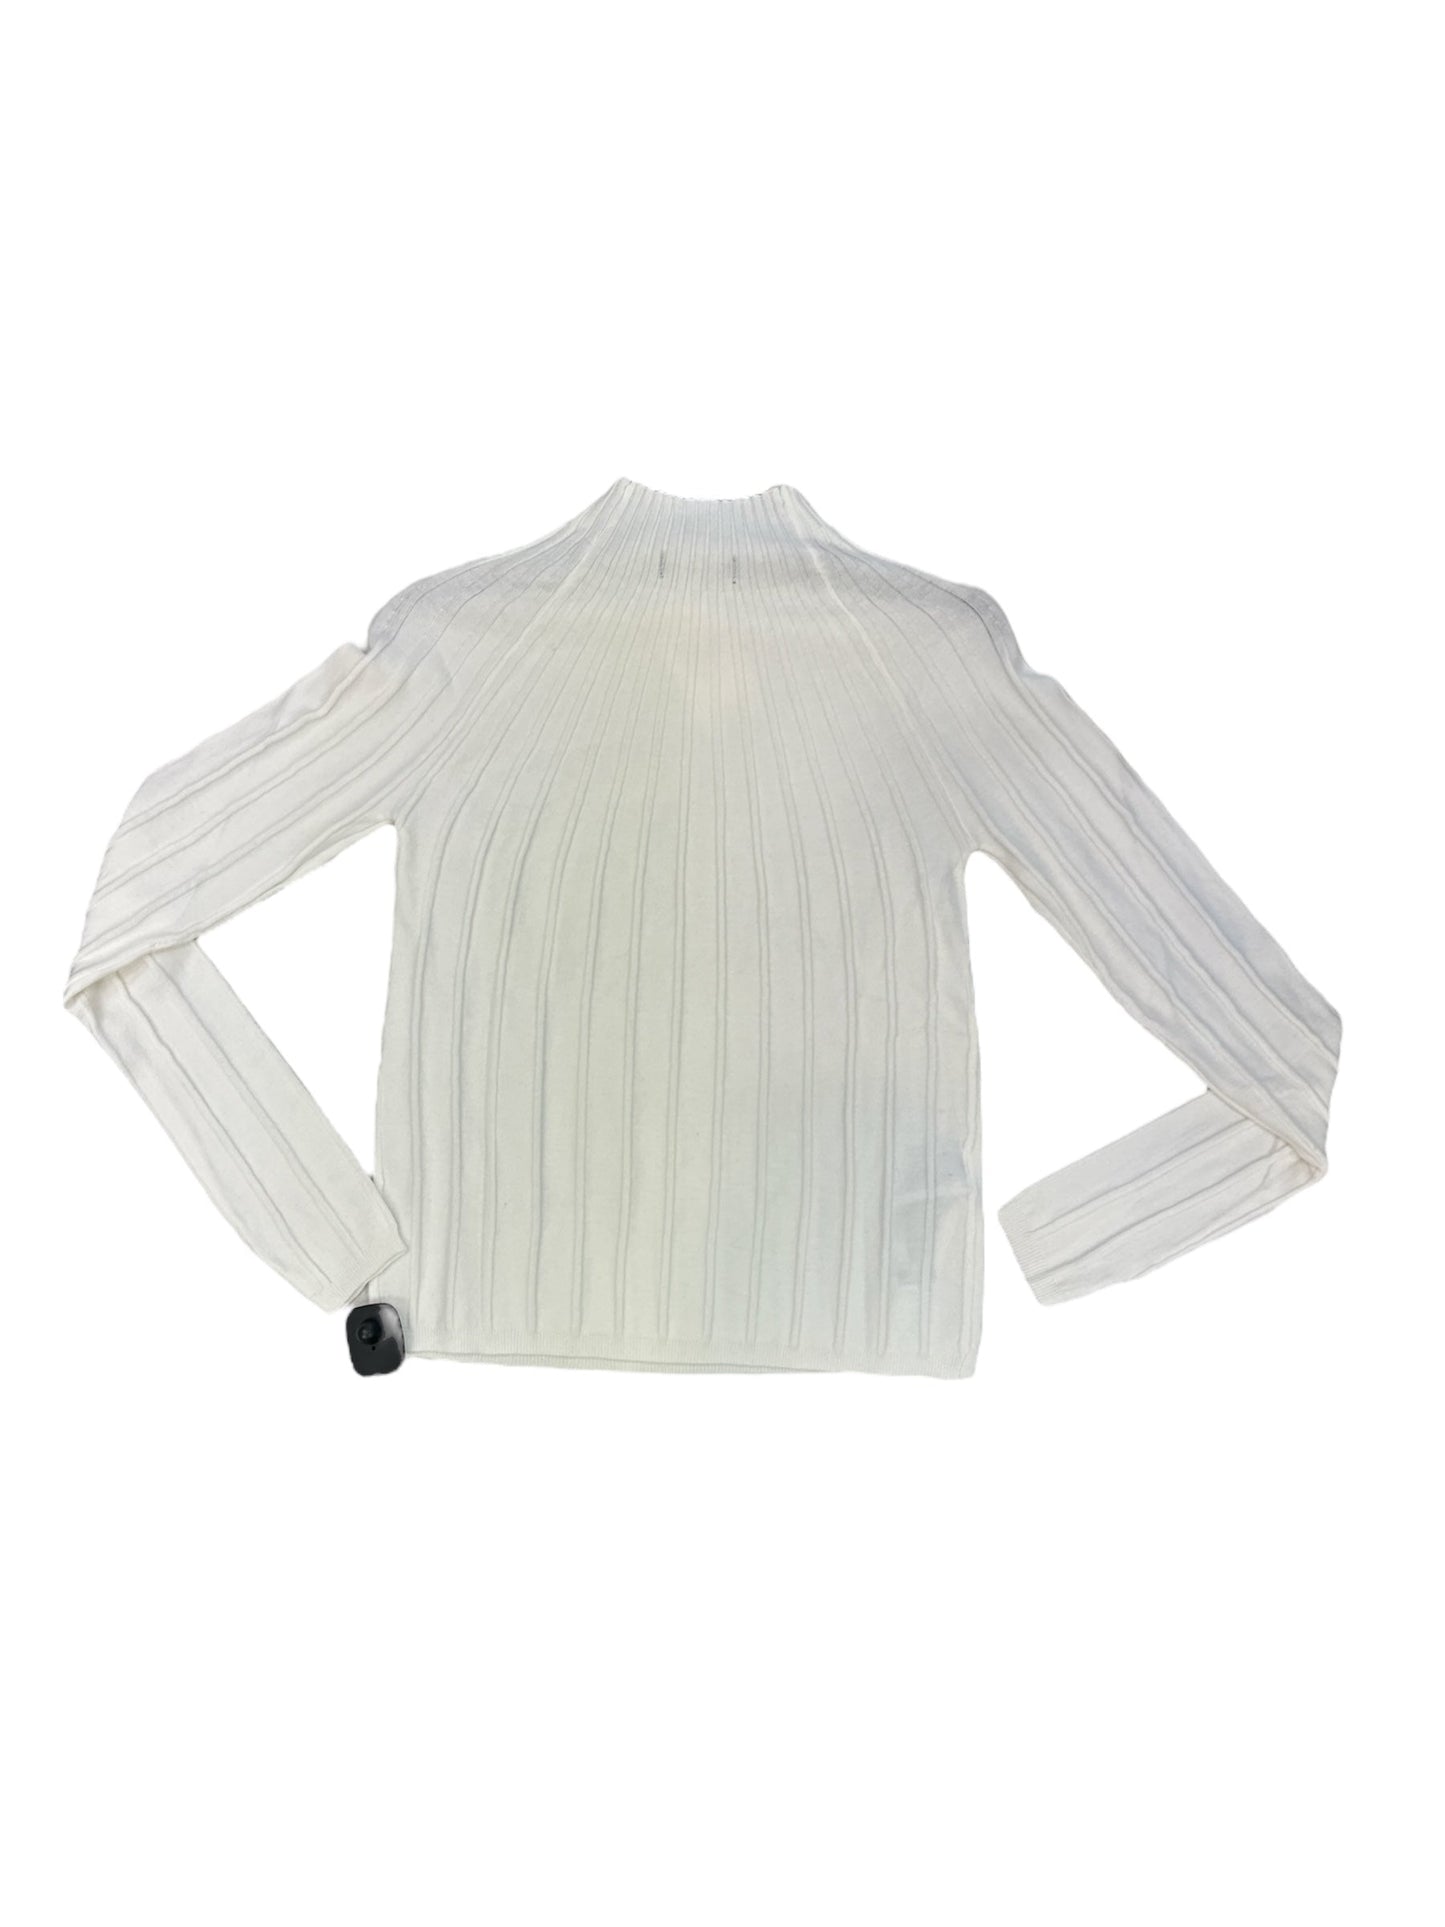 White Top Long Sleeve Mng, Size L